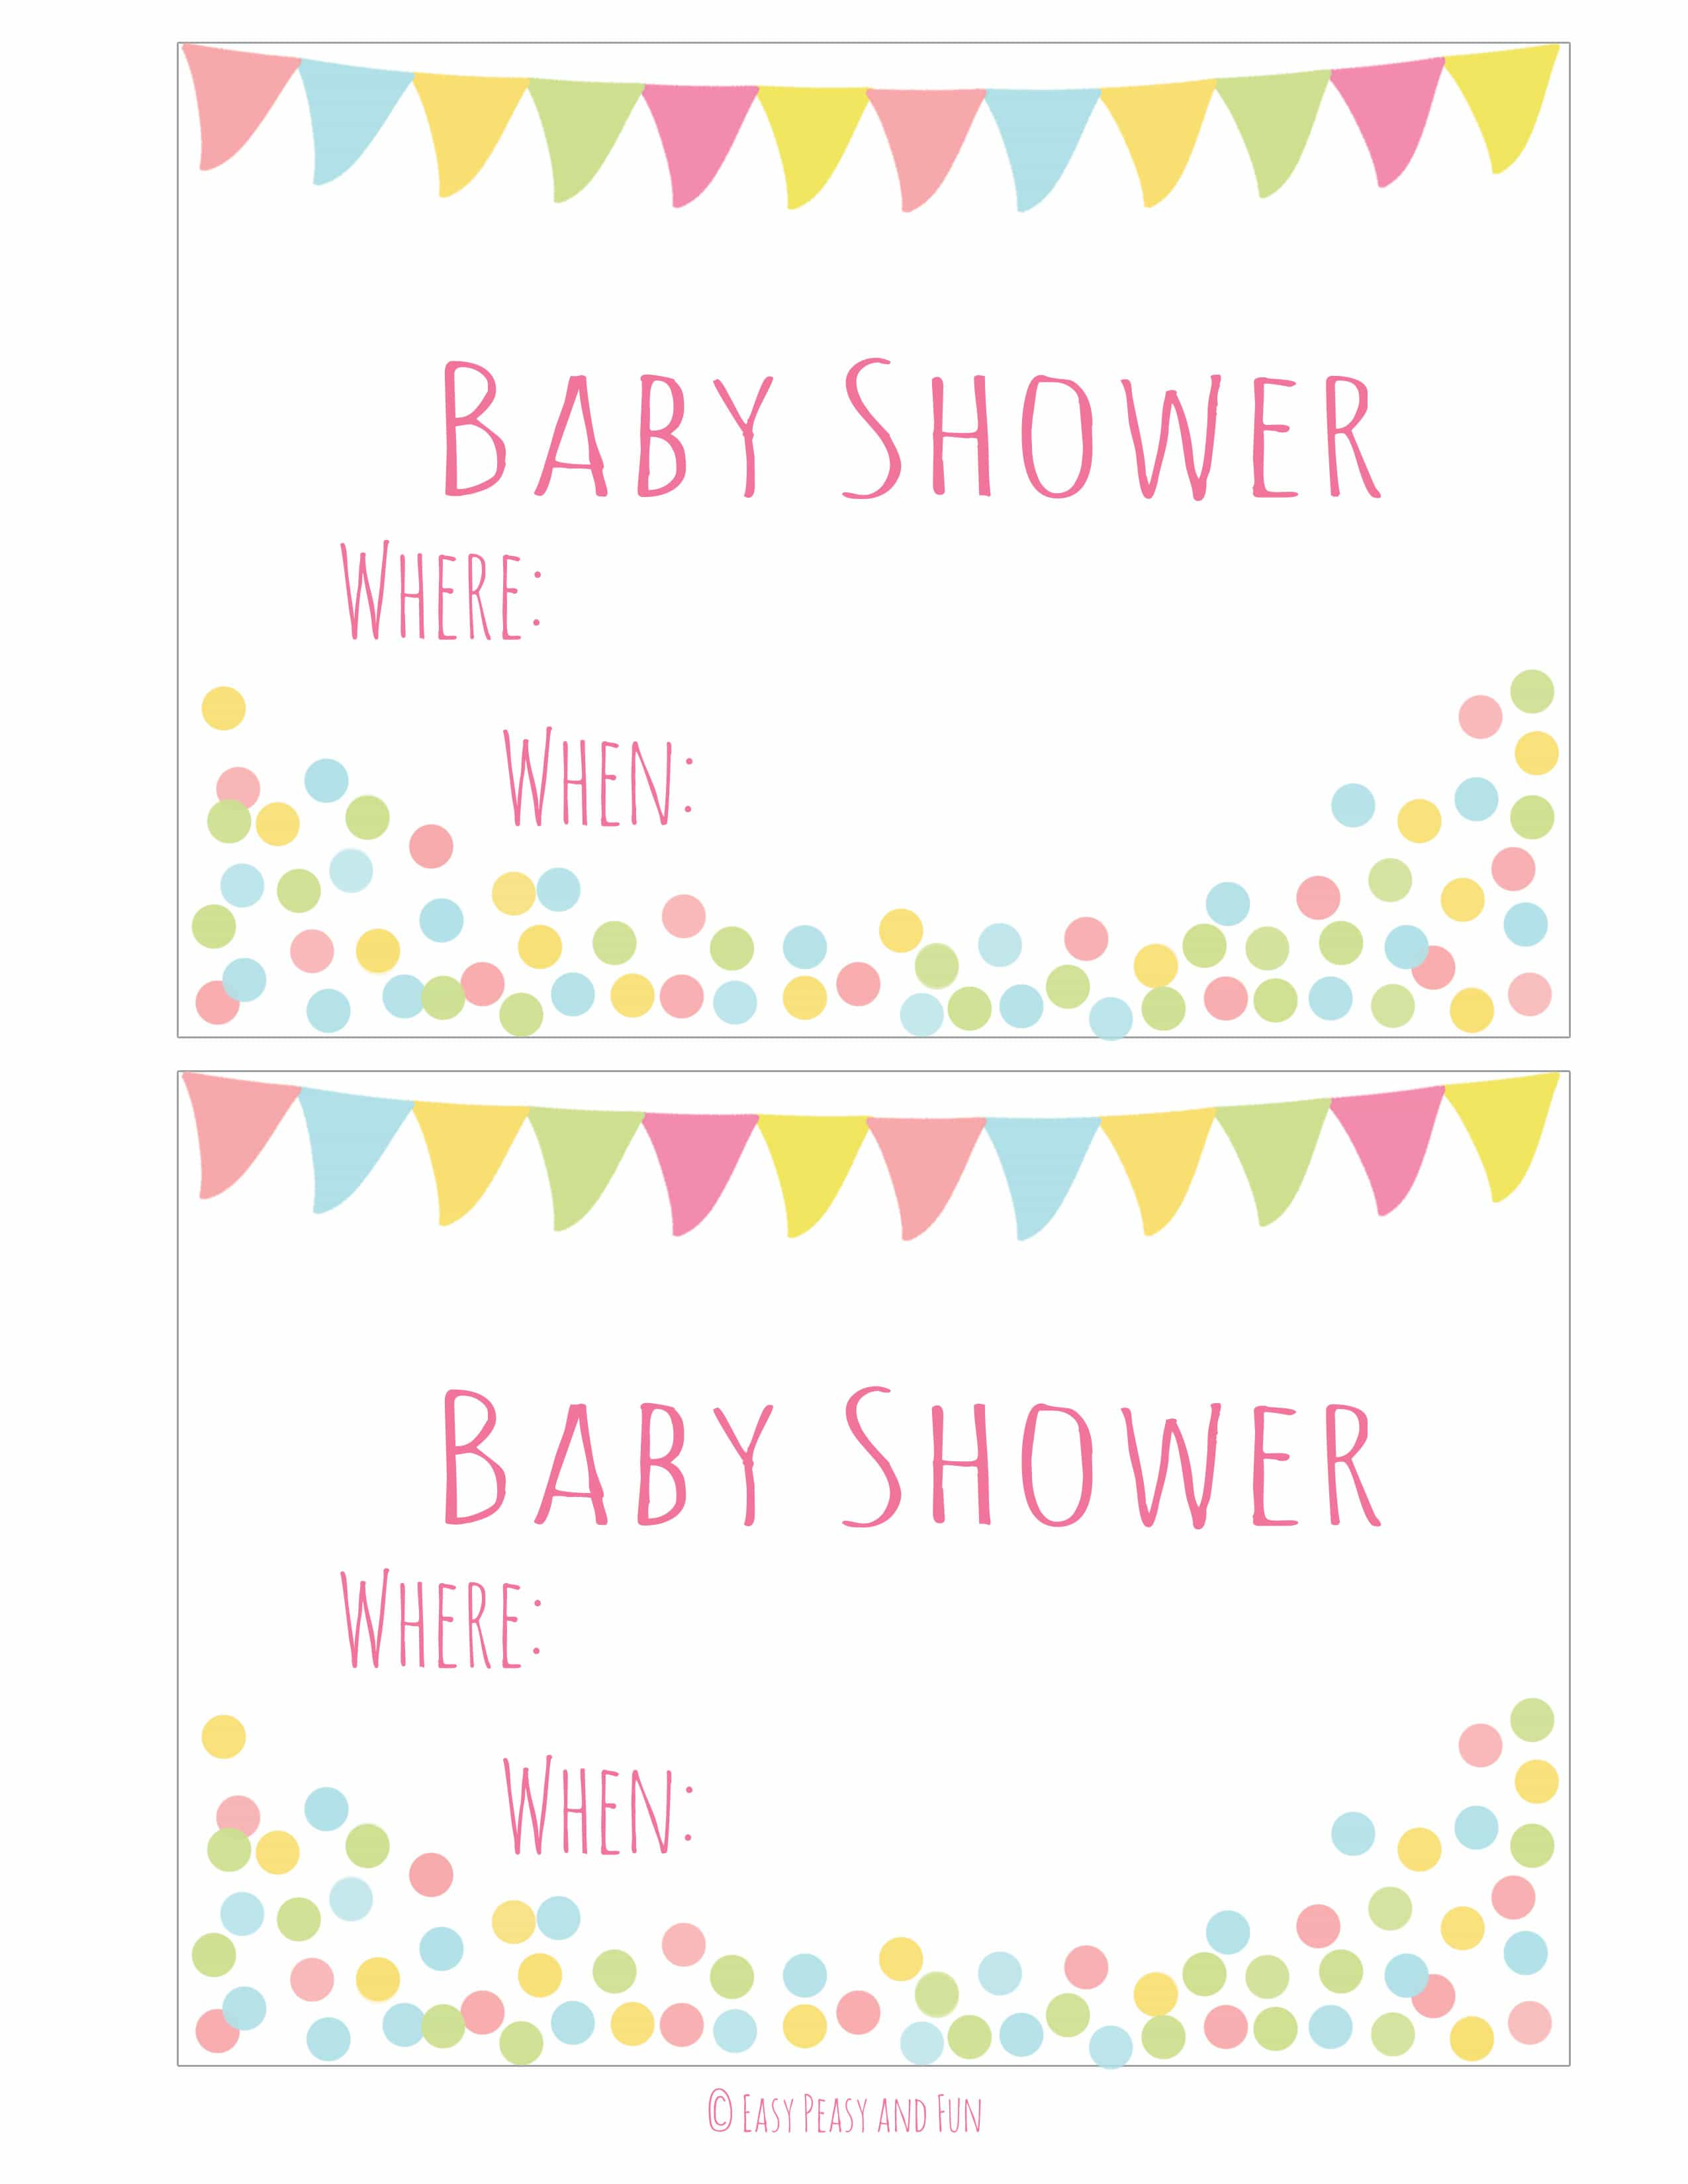 Free Printable Ba Shower Invitation Easy Peasy And Fun with regard to dimensions 2550 X 3300